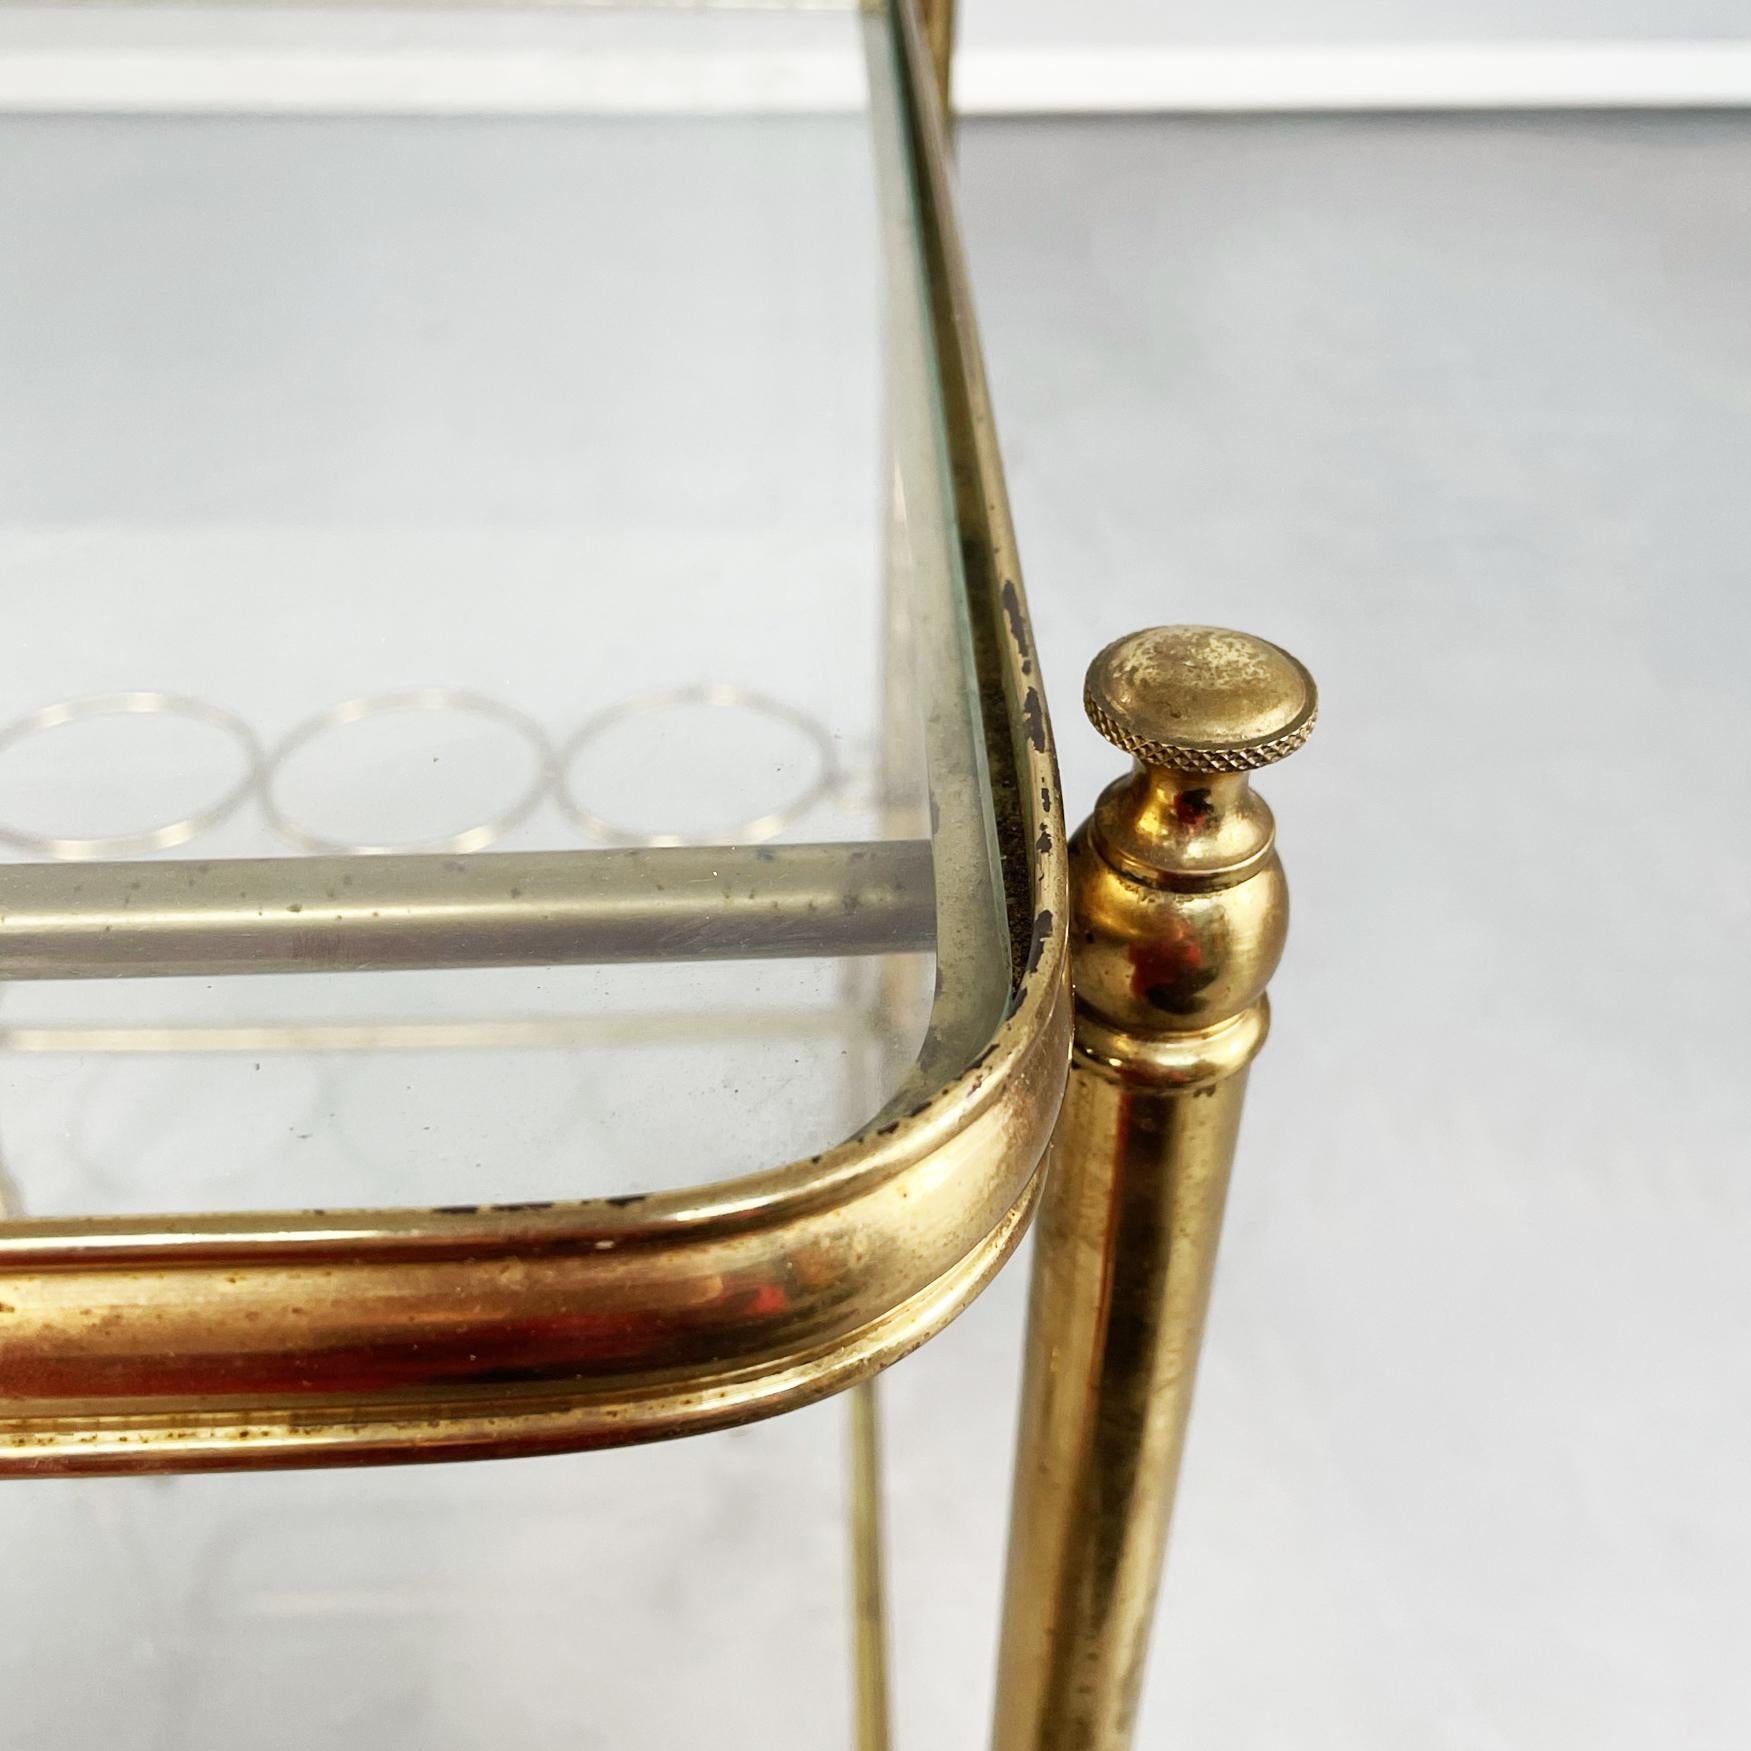 Italian Mid-Century Modern Bar Cart in Brass and Glass, 1950s For Sale 2